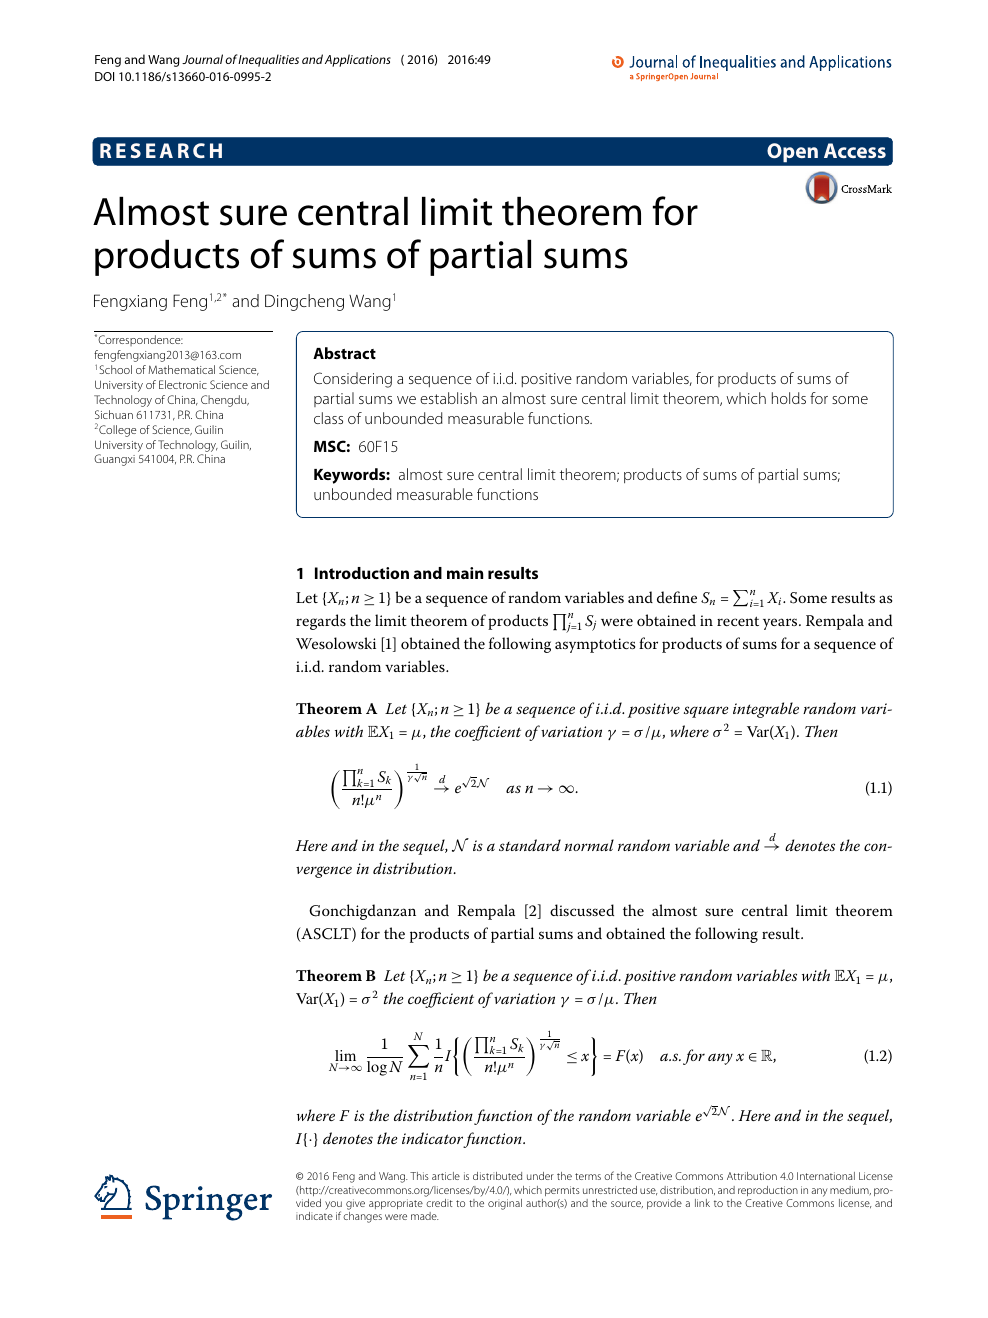 Almost Sure Central Limit Theorem For Products Of Sums Of Partial Sums Topic Of Research Paper In Mathematics Download Scholarly Article Pdf And Read For Free On Cyberleninka Open Science Hub